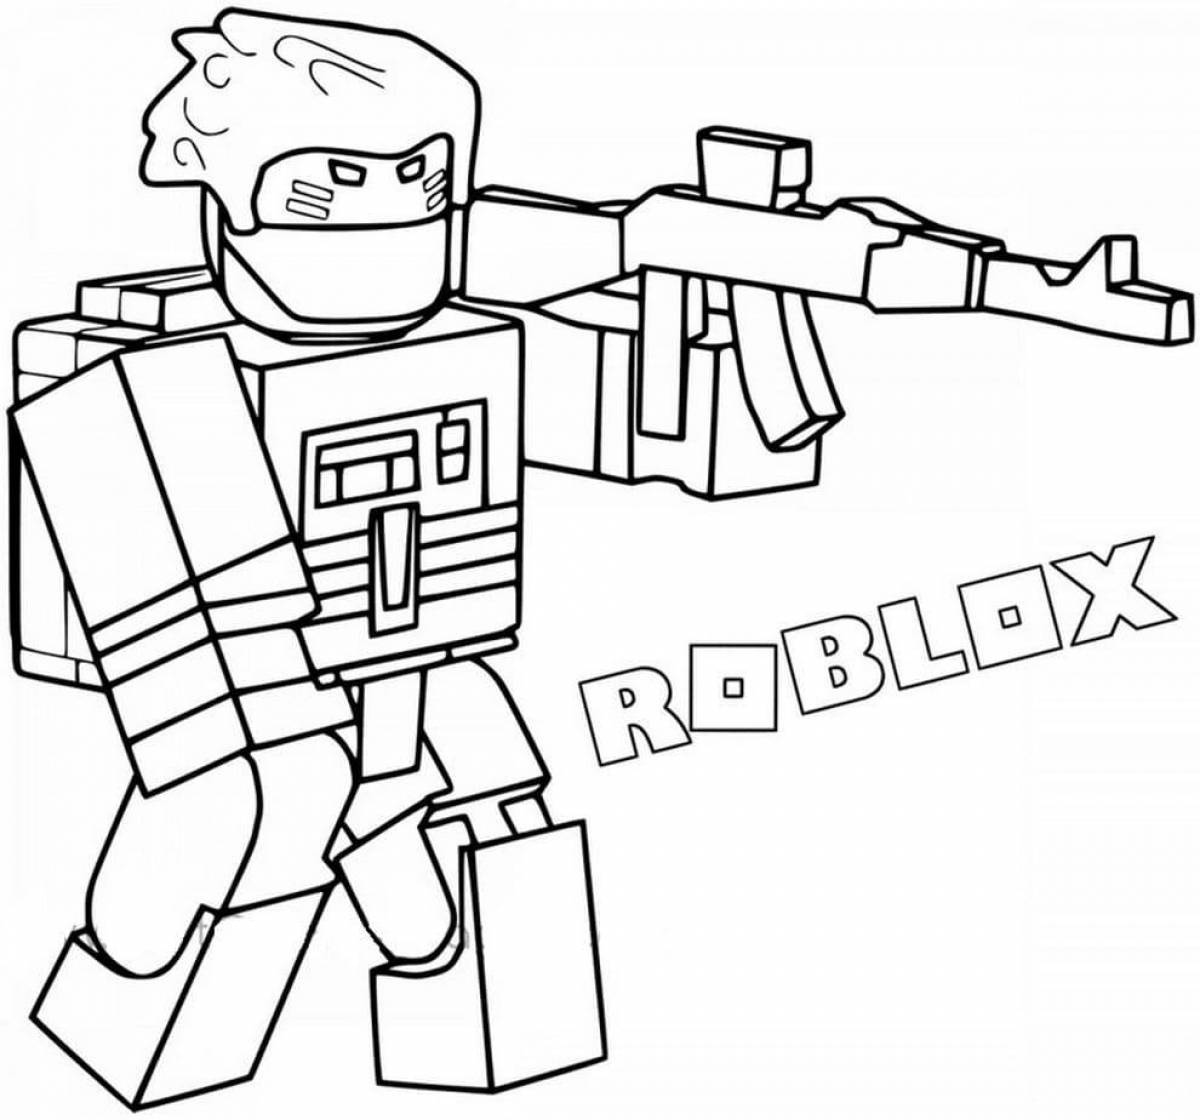 Color-lively roblox coloring page for boys